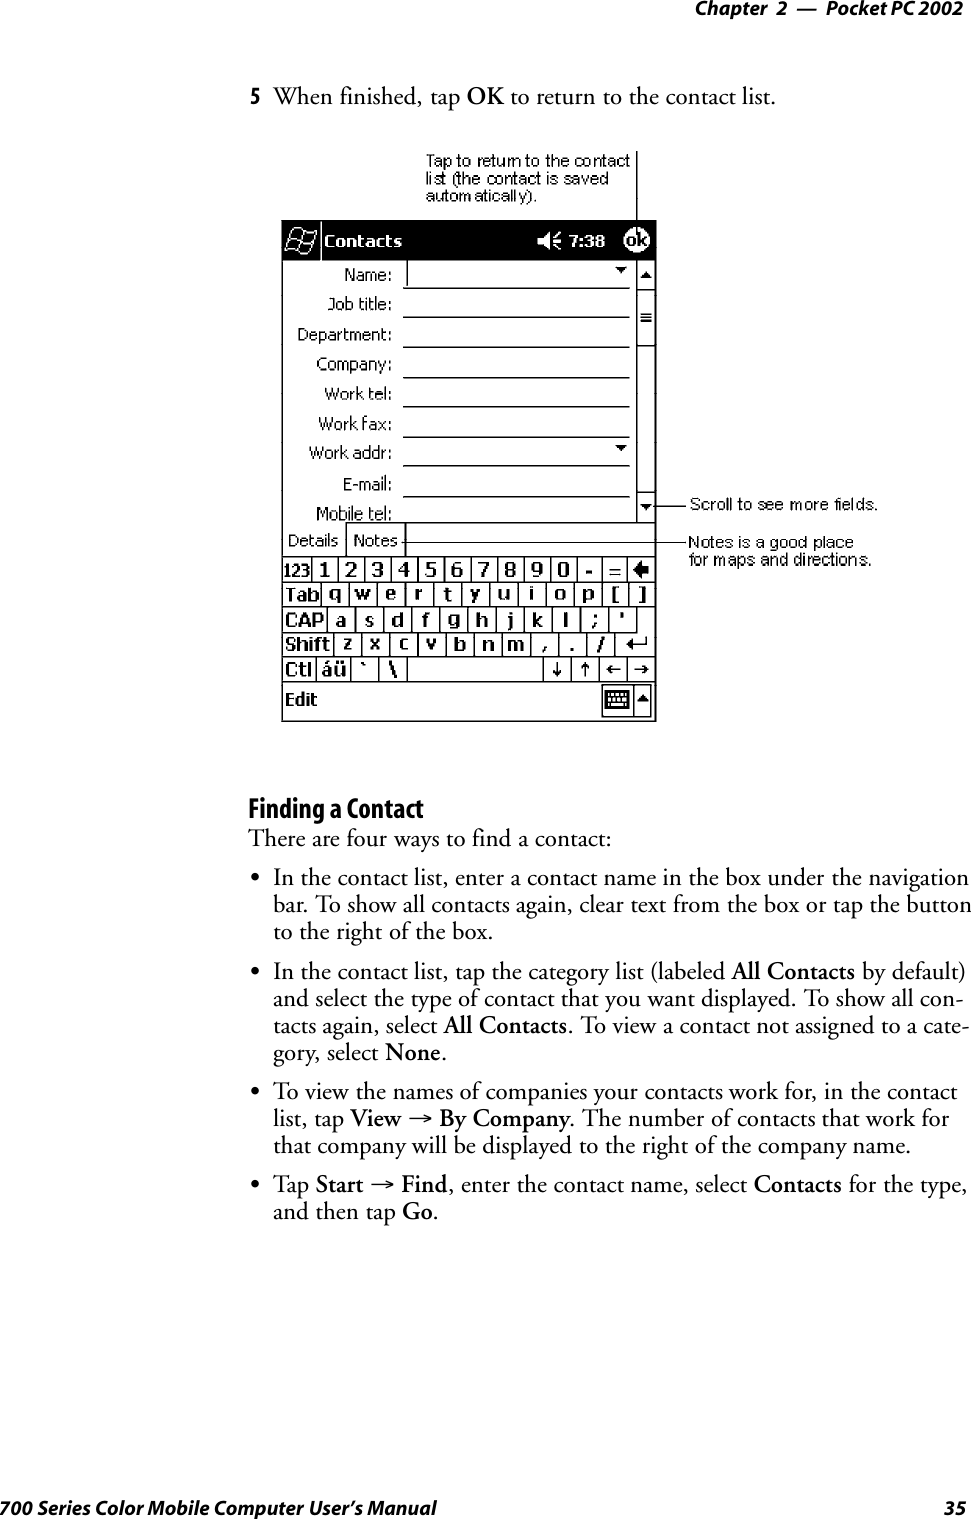 Pocket PC 2002—Chapter 235700 Series Color Mobile Computer User’s Manual5When finished, tap OK to return to the contact list.Finding a ContactThere are four ways to find a contact:SIn the contact list, enter a contact name in the box under the navigationbar. To show all contacts again, clear text from the box or tap the buttonto the right of the box.SIn the contact list, tap the category list (labeled All Contacts by default)and select the type of contact that you want displayed. To show all con-tacts again, select All Contacts. To view a contact not assigned to a cate-gory, select None.STo view the names of companies your contacts work for, in the contactlist, tap View →By Company. The number of contacts that work forthat company will be displayed to the right of the company name.STap Start →Find, enter the contact name, select Contacts for the type,and then tap Go.